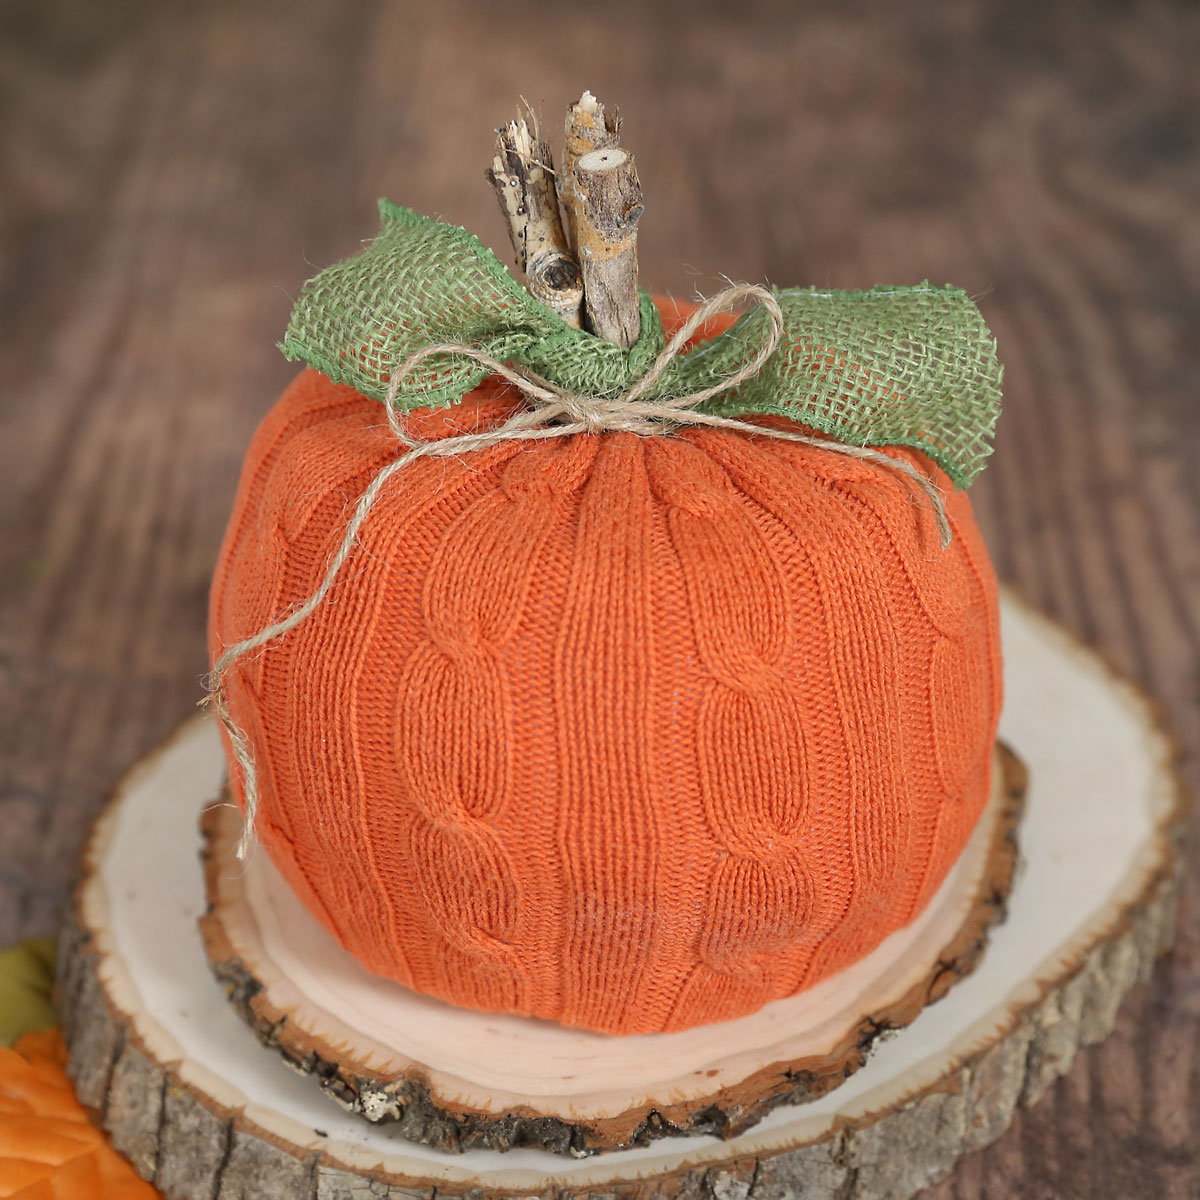 Pumpkin decoration made from a roll of toilet paper covered with orange sweater fabric